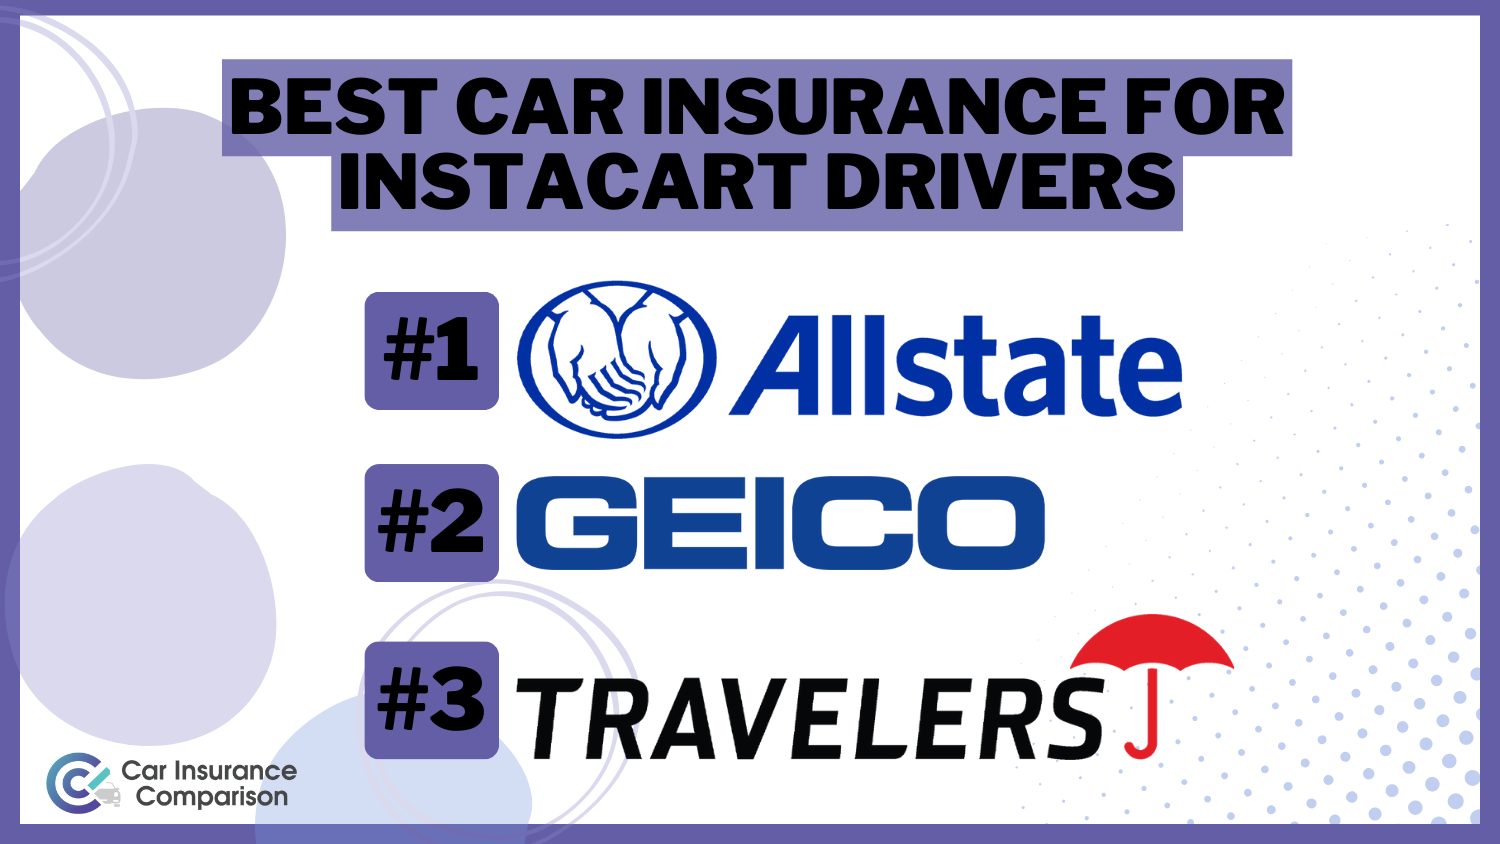 Allstate, Geico, and Travelers: Best Car Insurance for Instacart Drivers